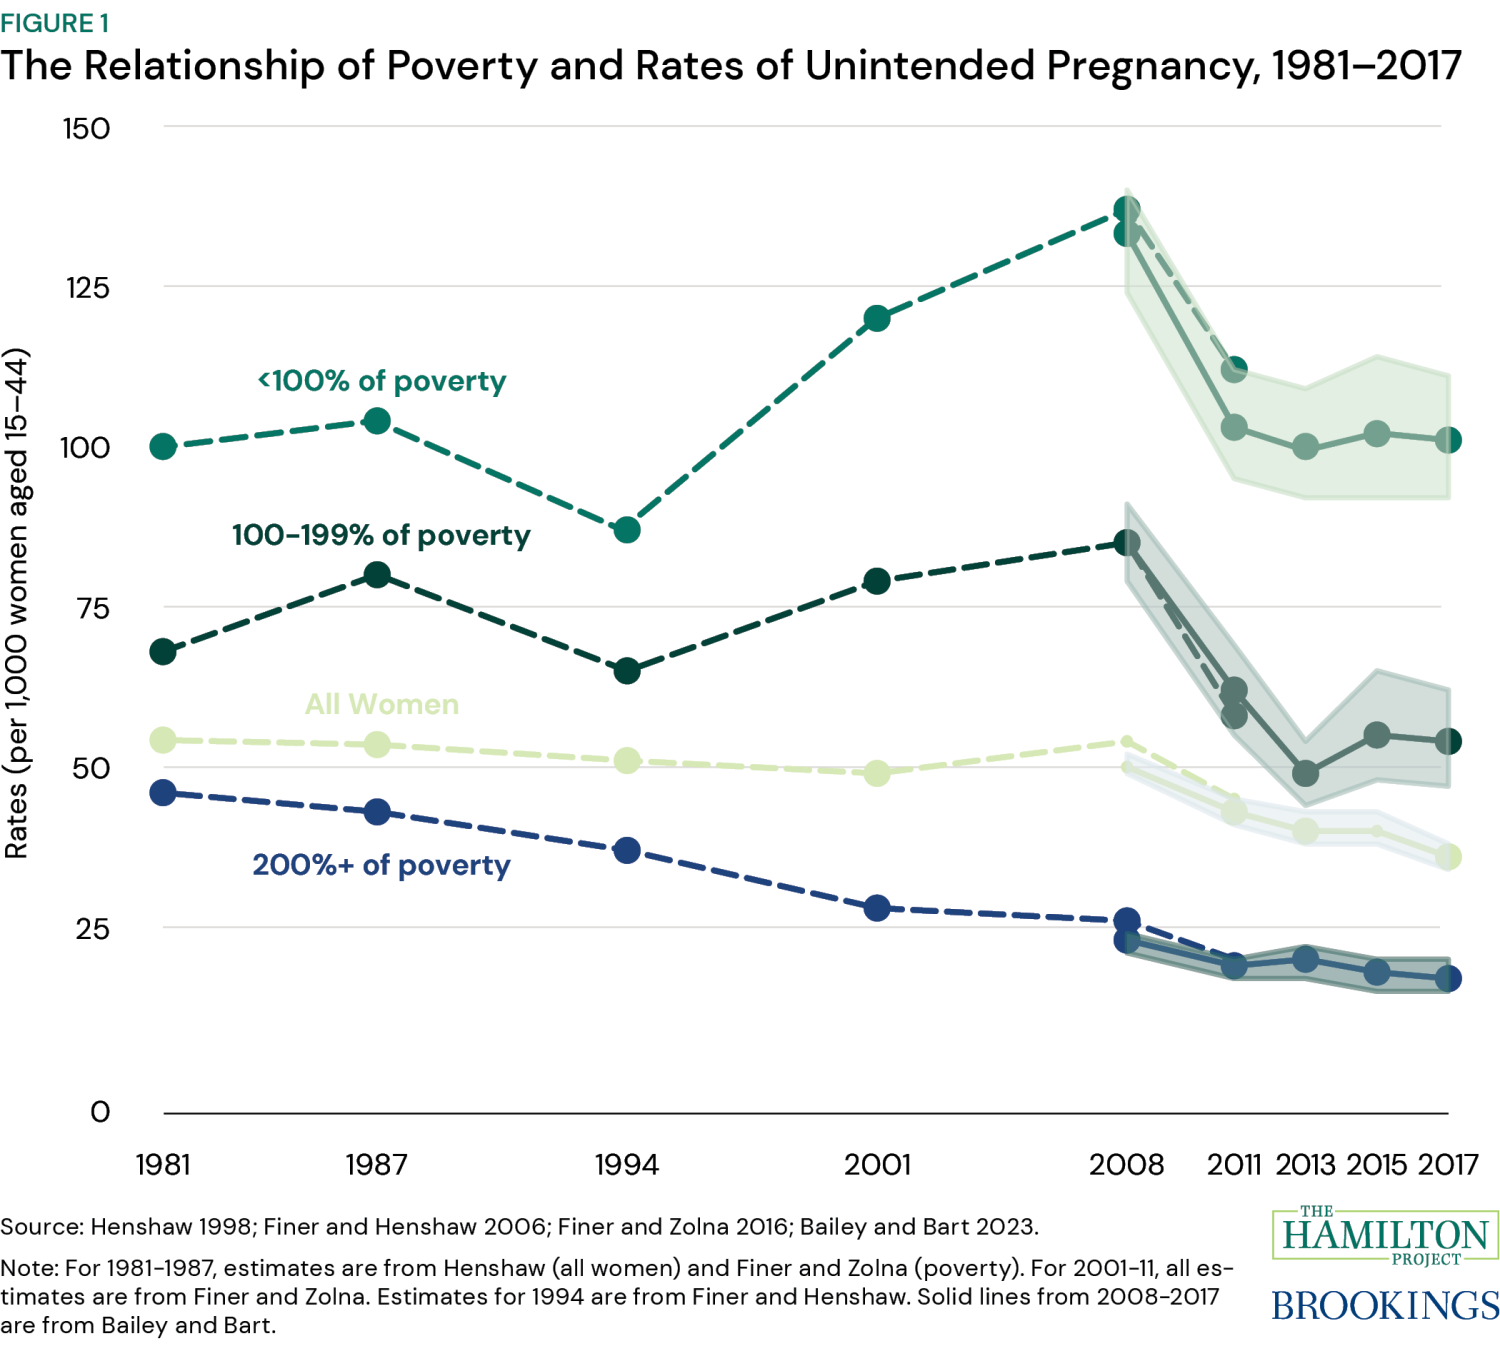 A chart illustrating the relationship of poverty and rates of unintended pregnancy